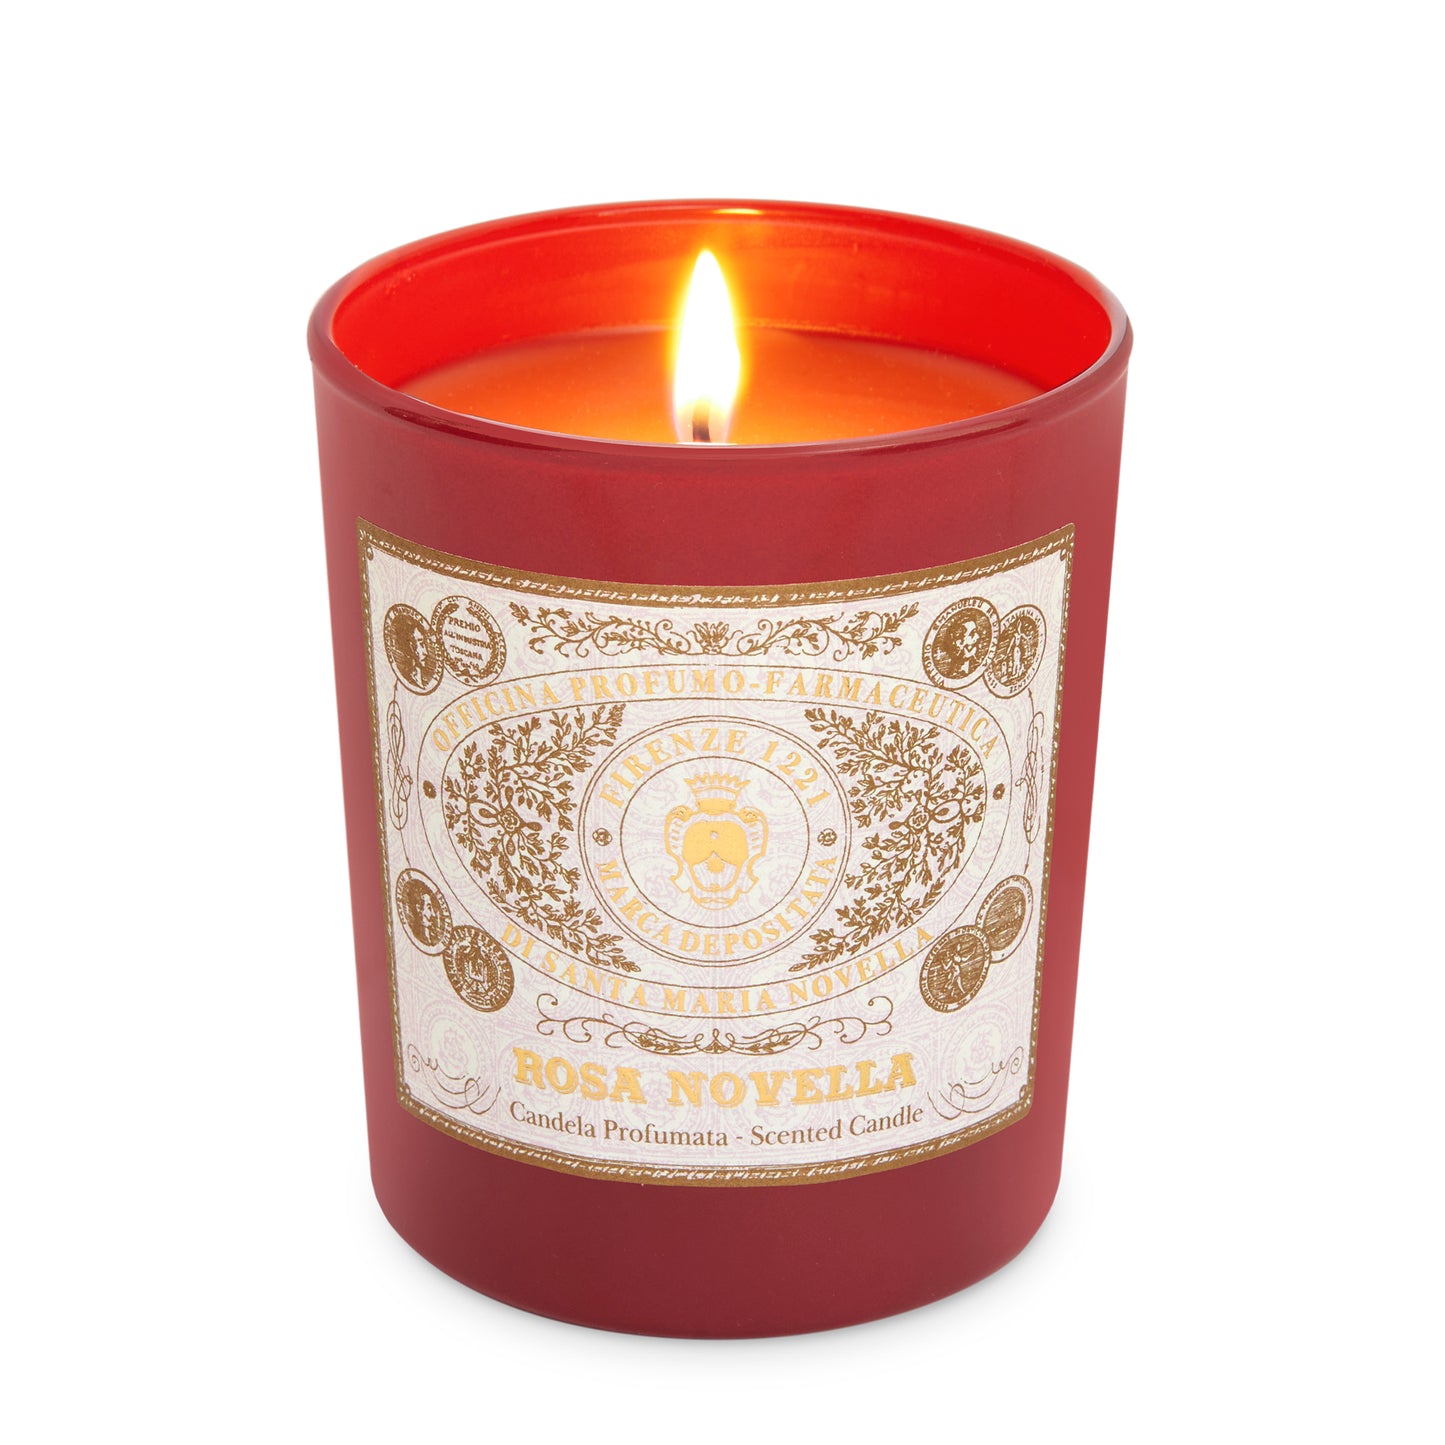 Primary Image of Rosa Novella Scented Candle